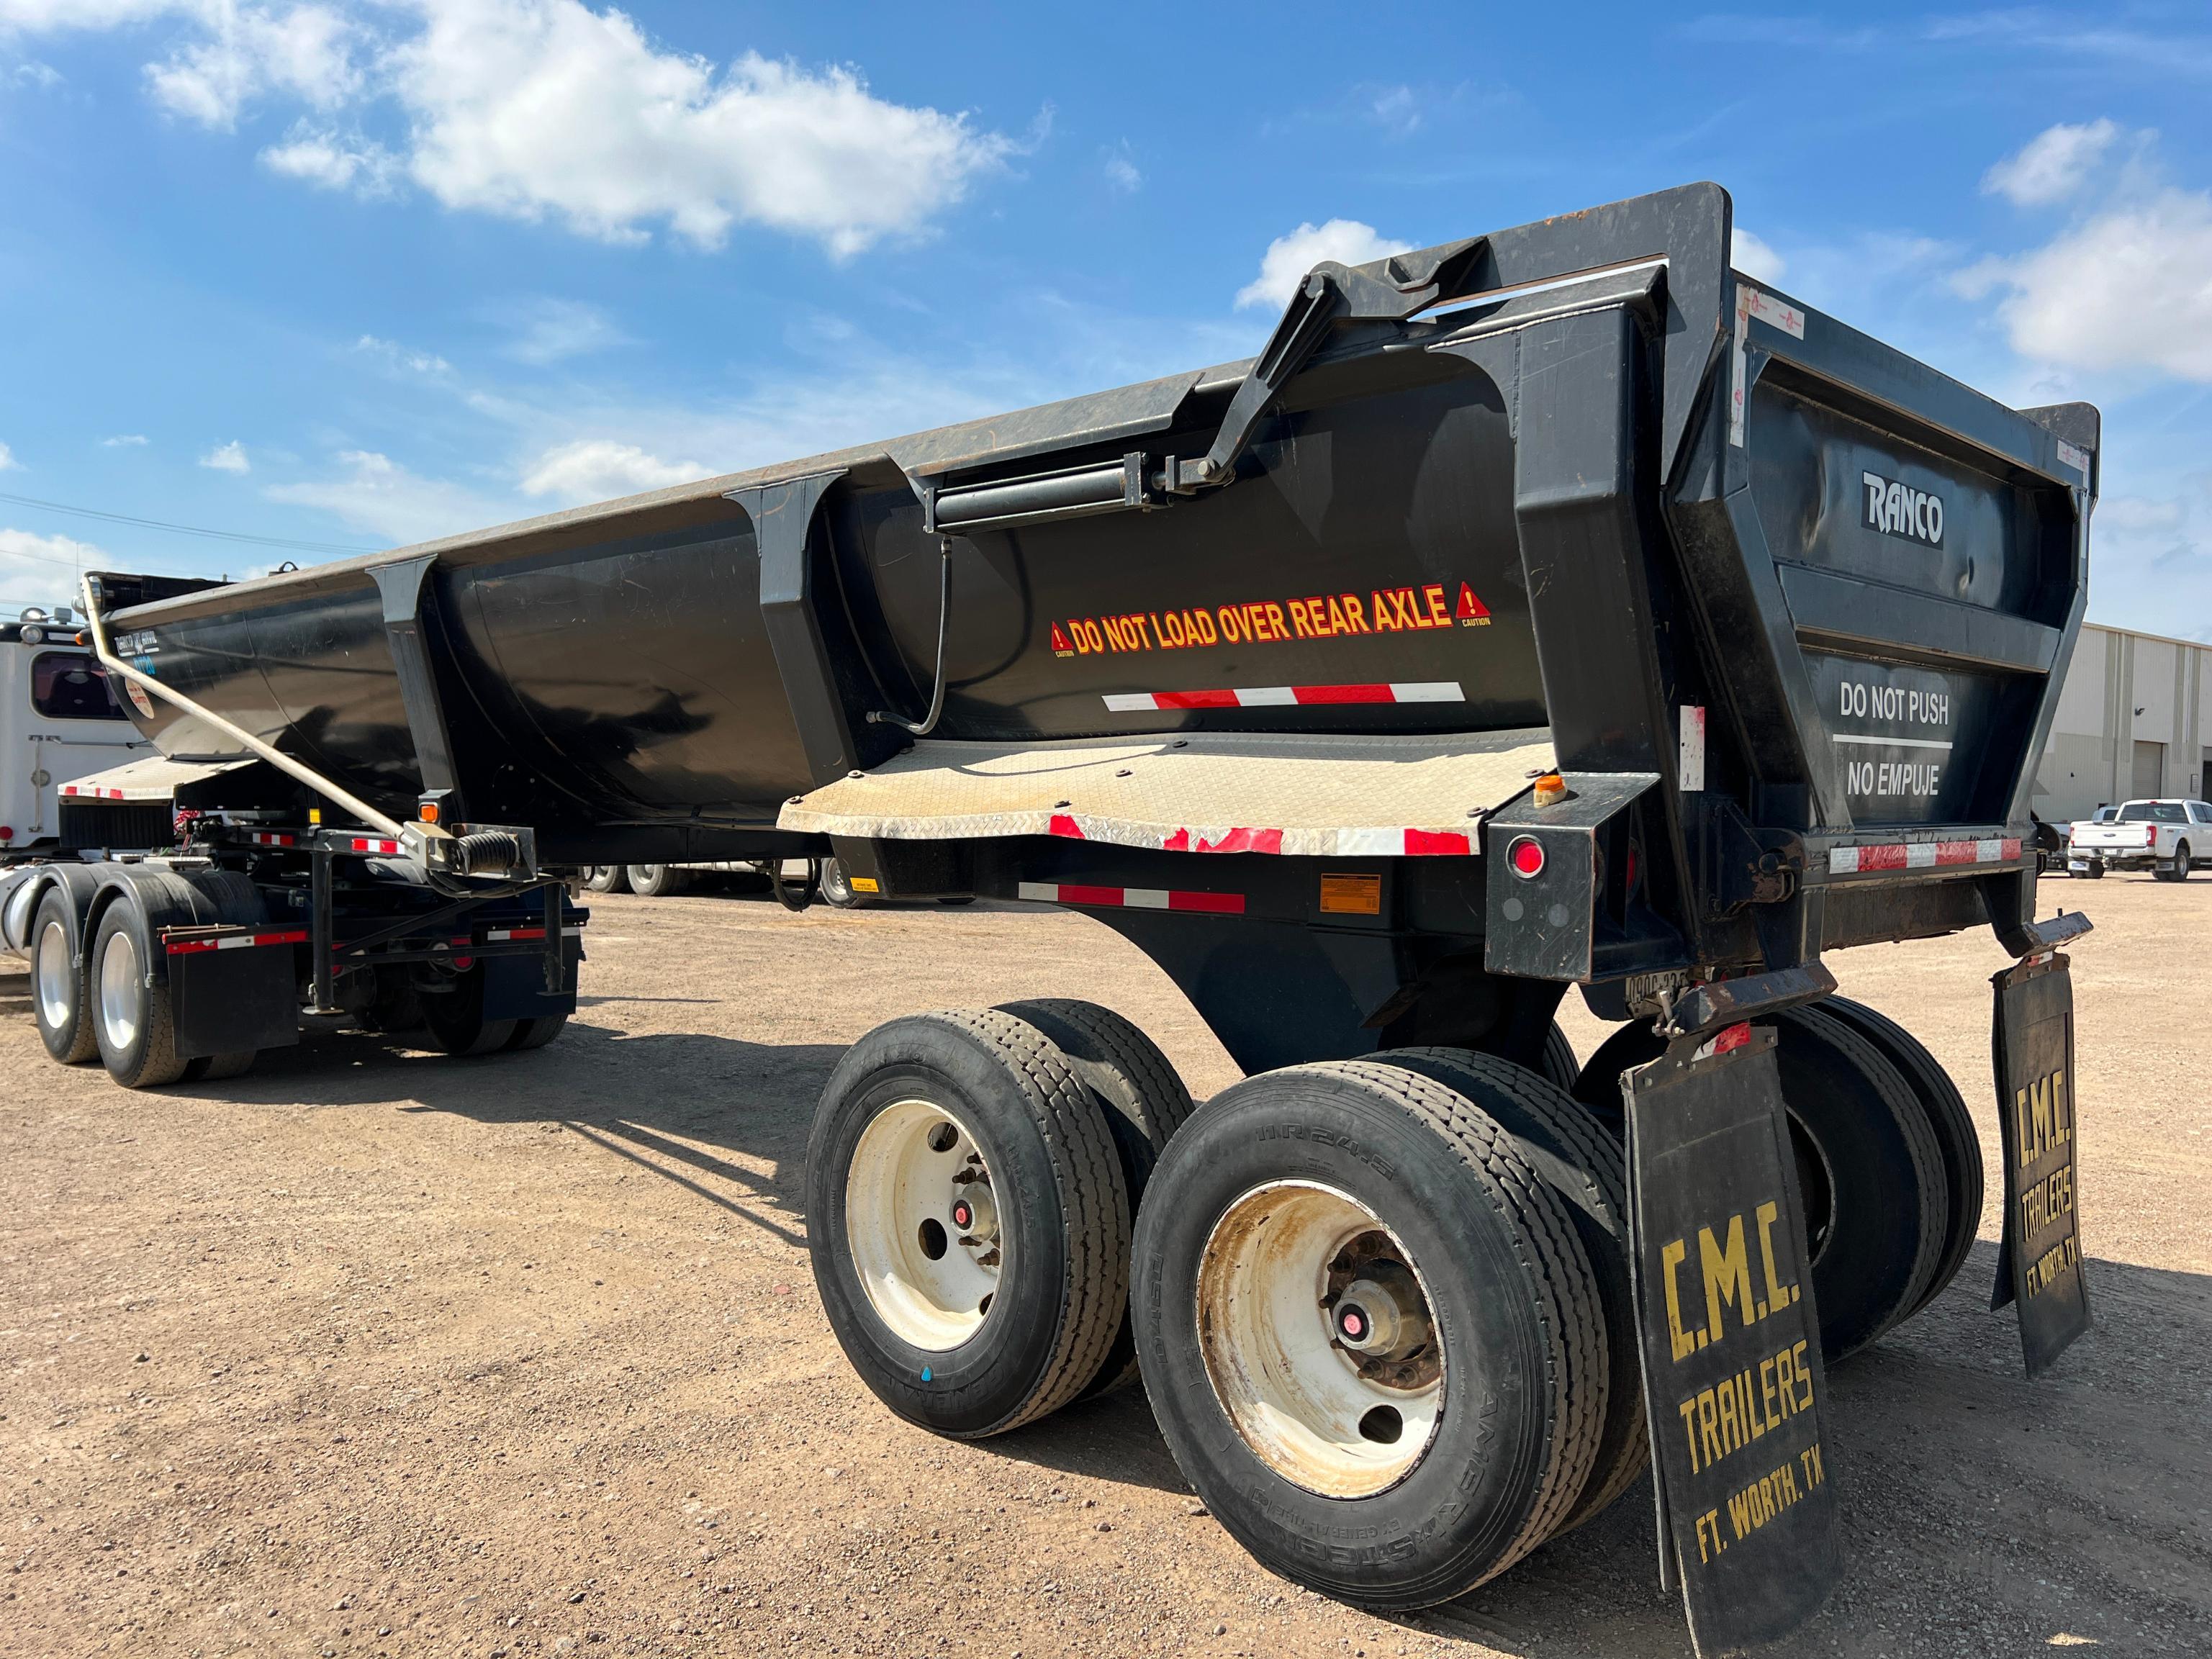 2017 RANCO ED26-34 DUMP TRAILER VN:1UNSD342XHL153150...equipped with 34ft. Dump body, 26 yard